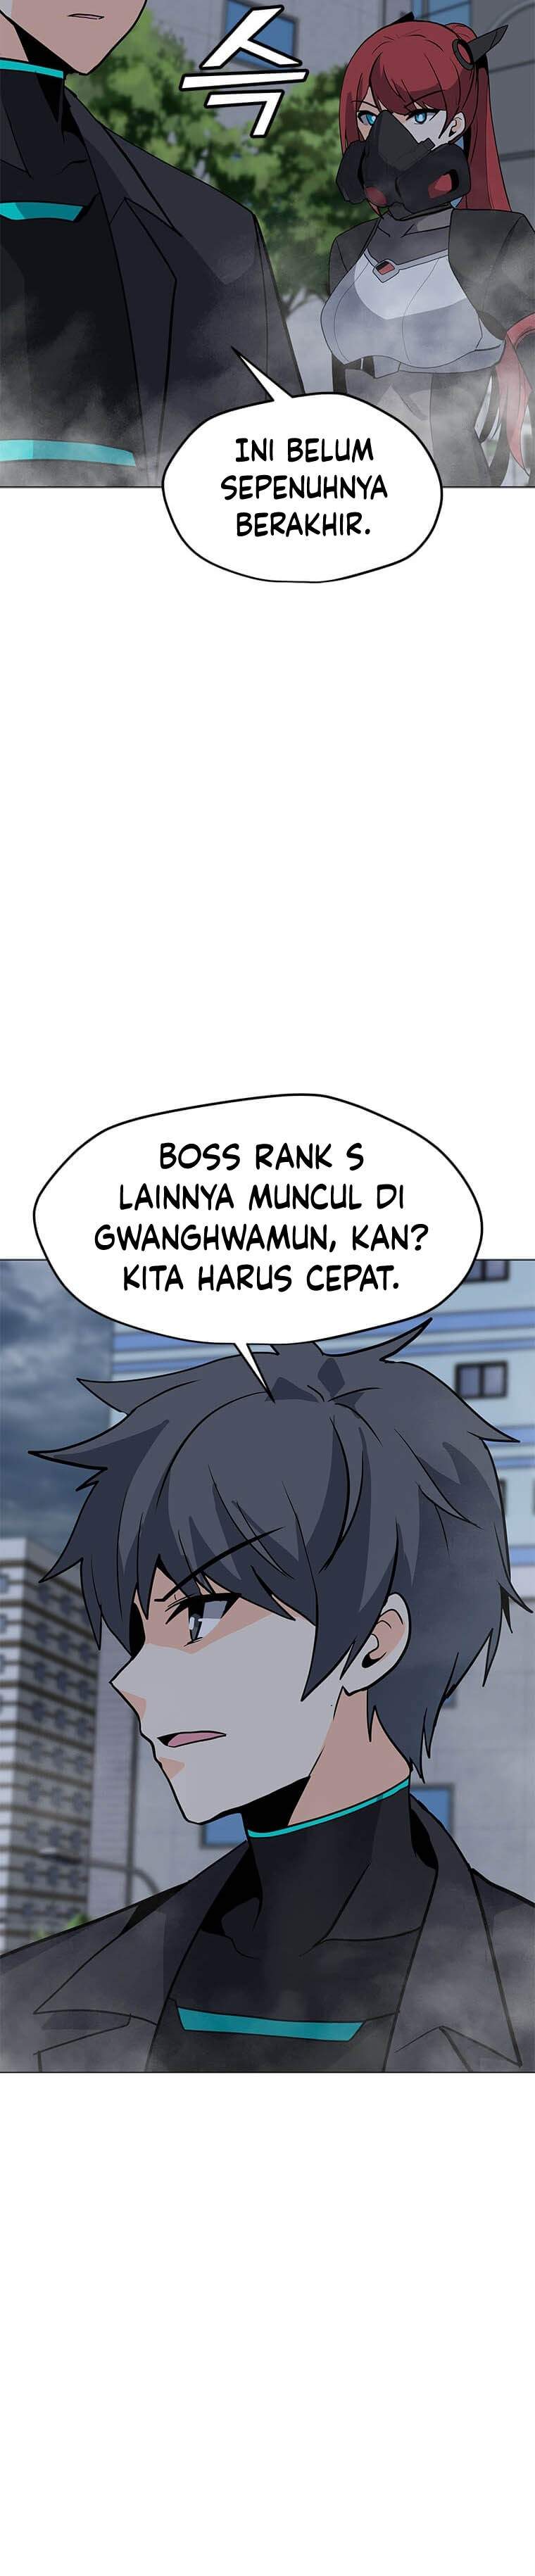 Solo Spell Caster Chapter 67